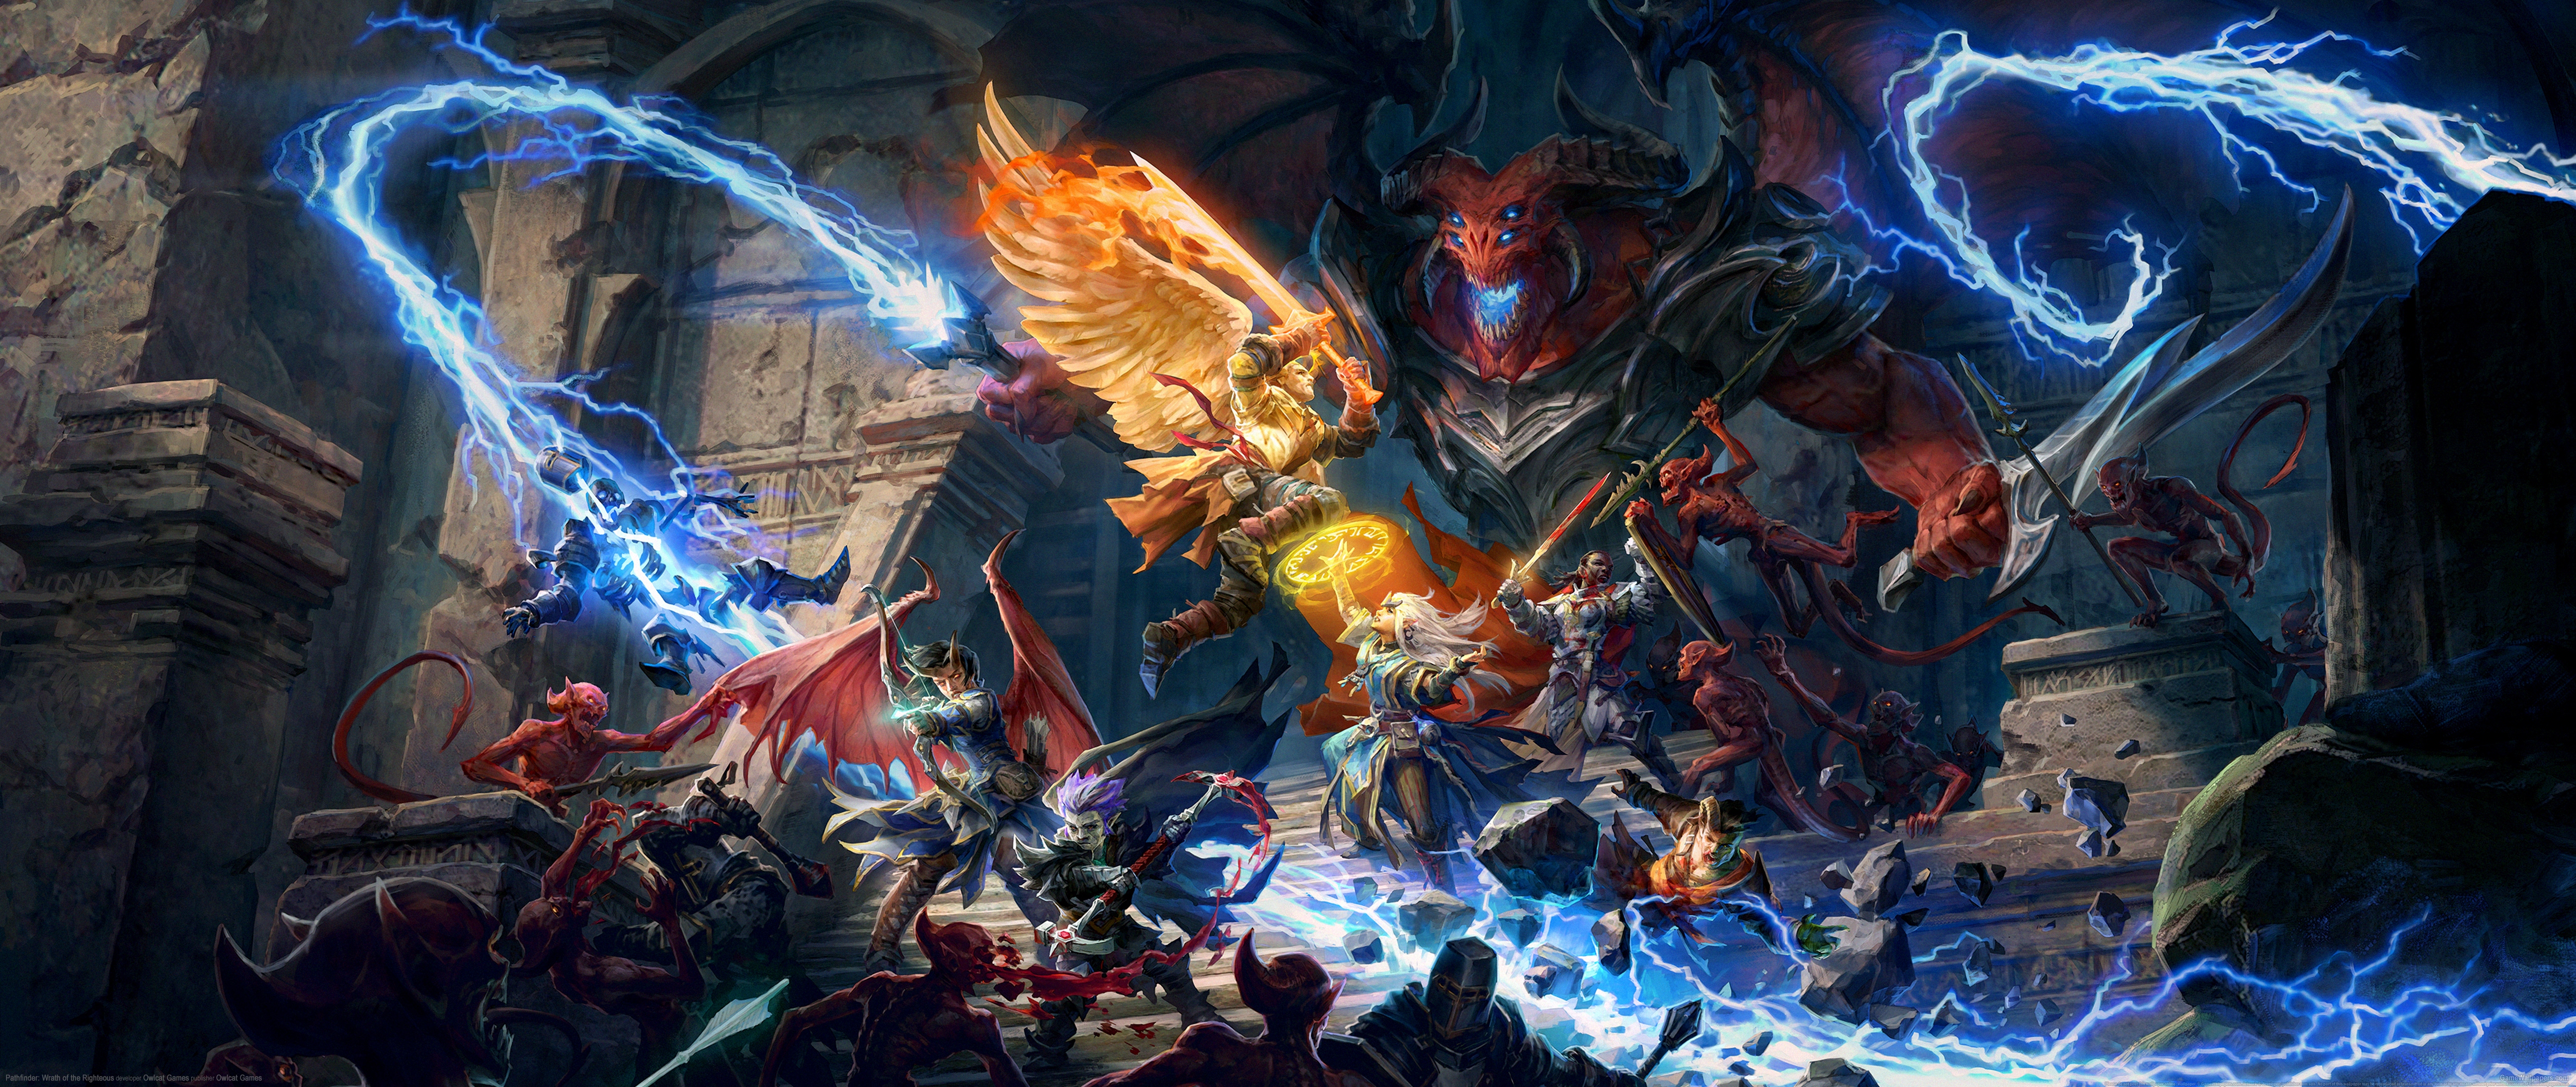 Pathfinder: Wrath of the Righteous 5120x2160 wallpaper or background 01